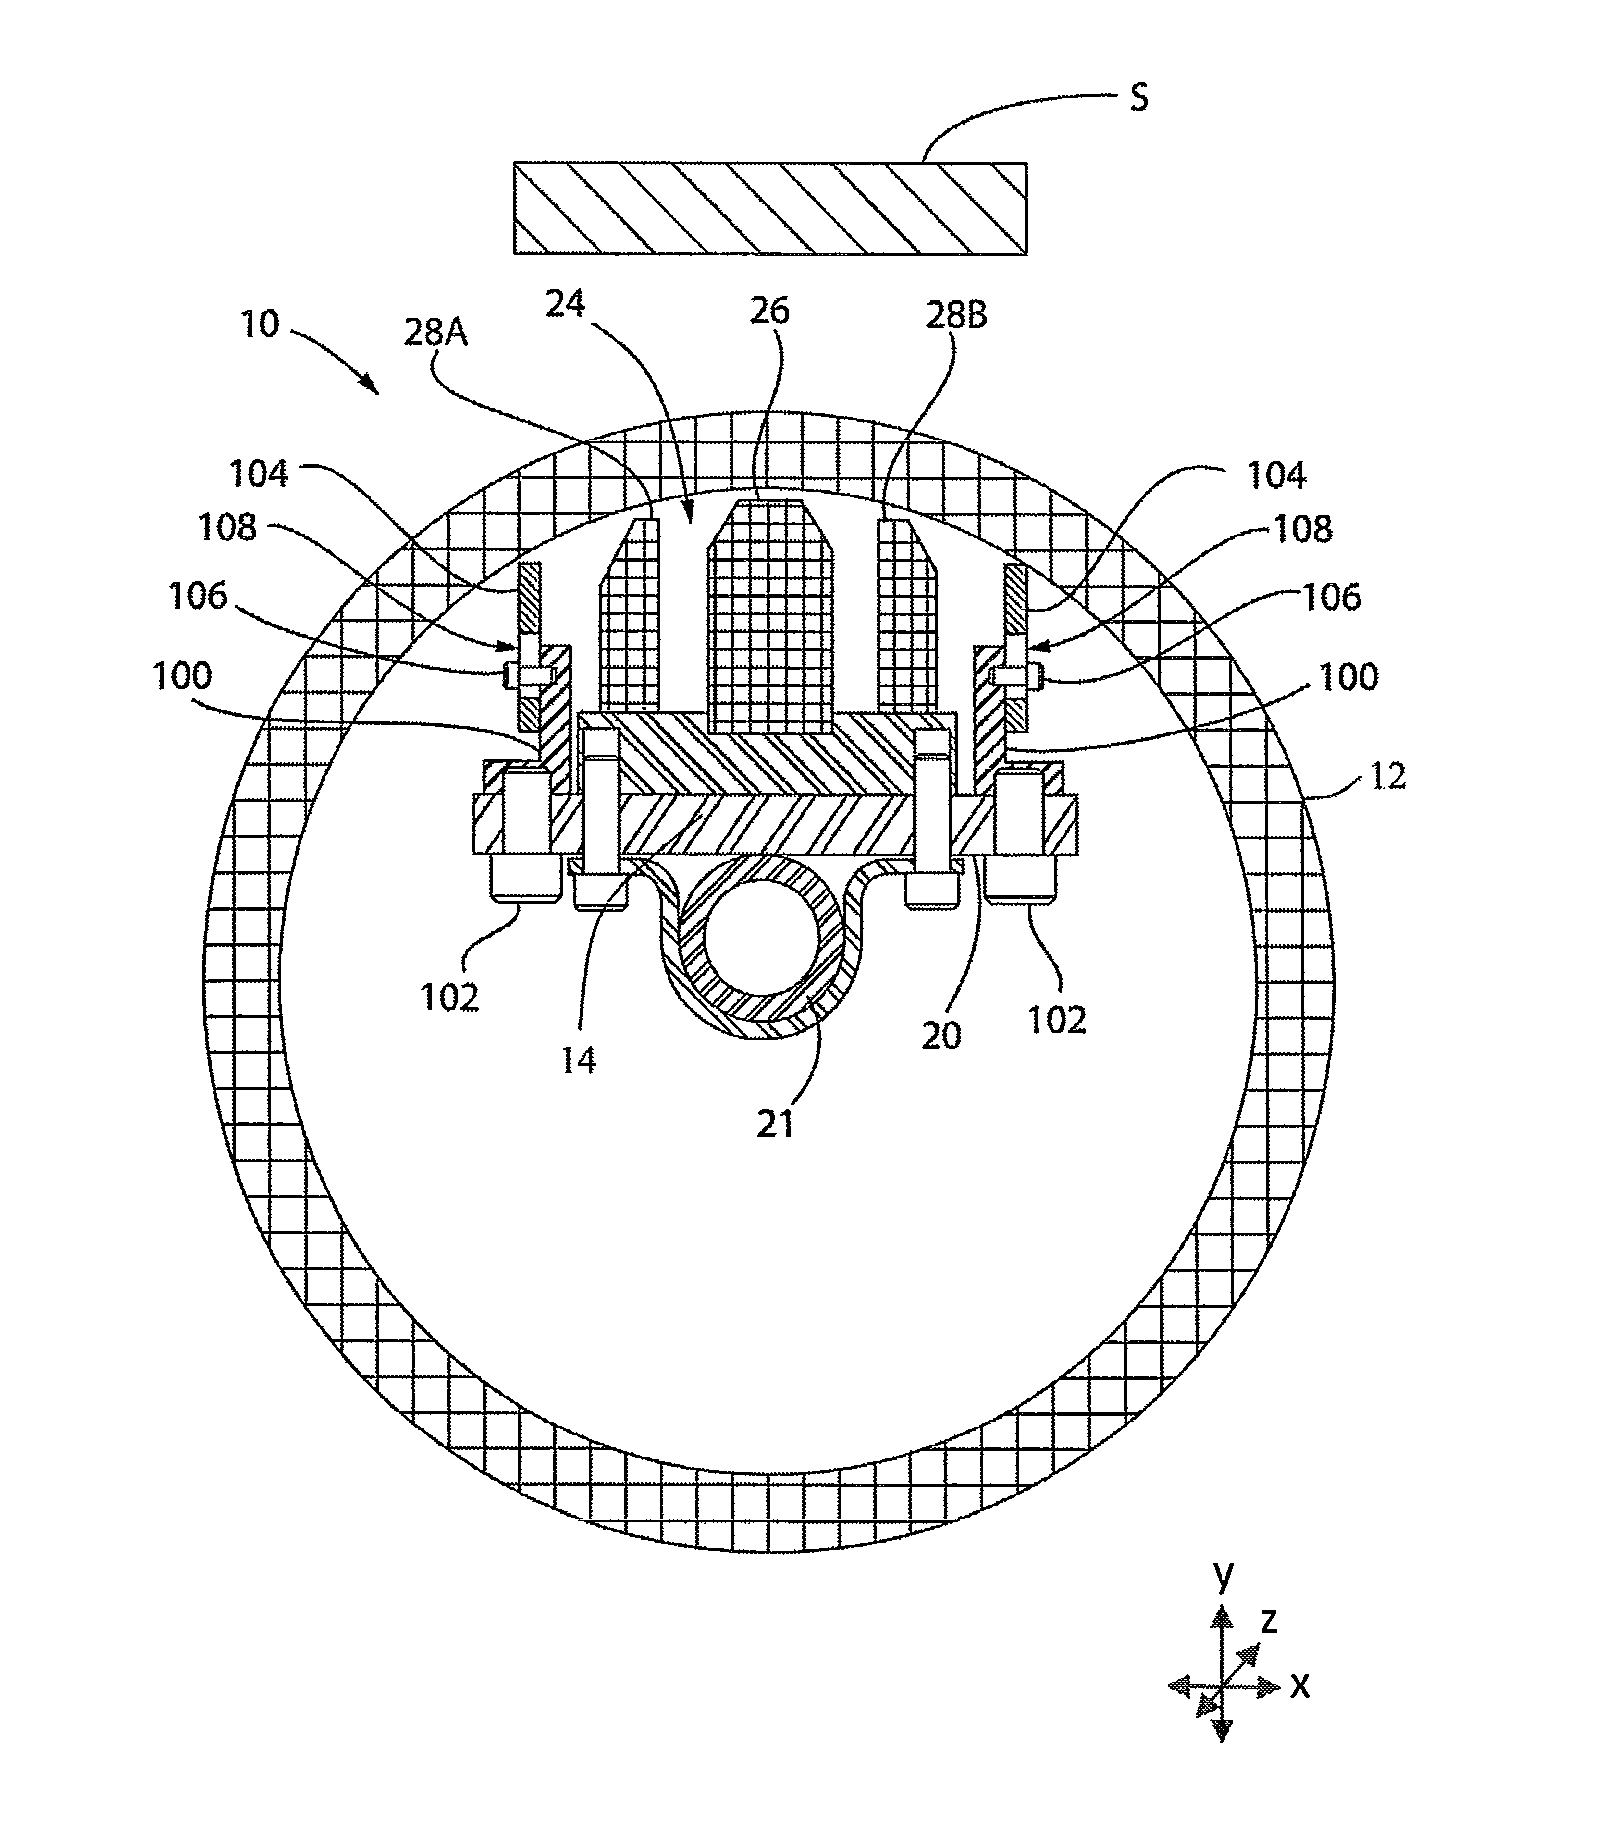 Cylindrical magnetron having a shunt